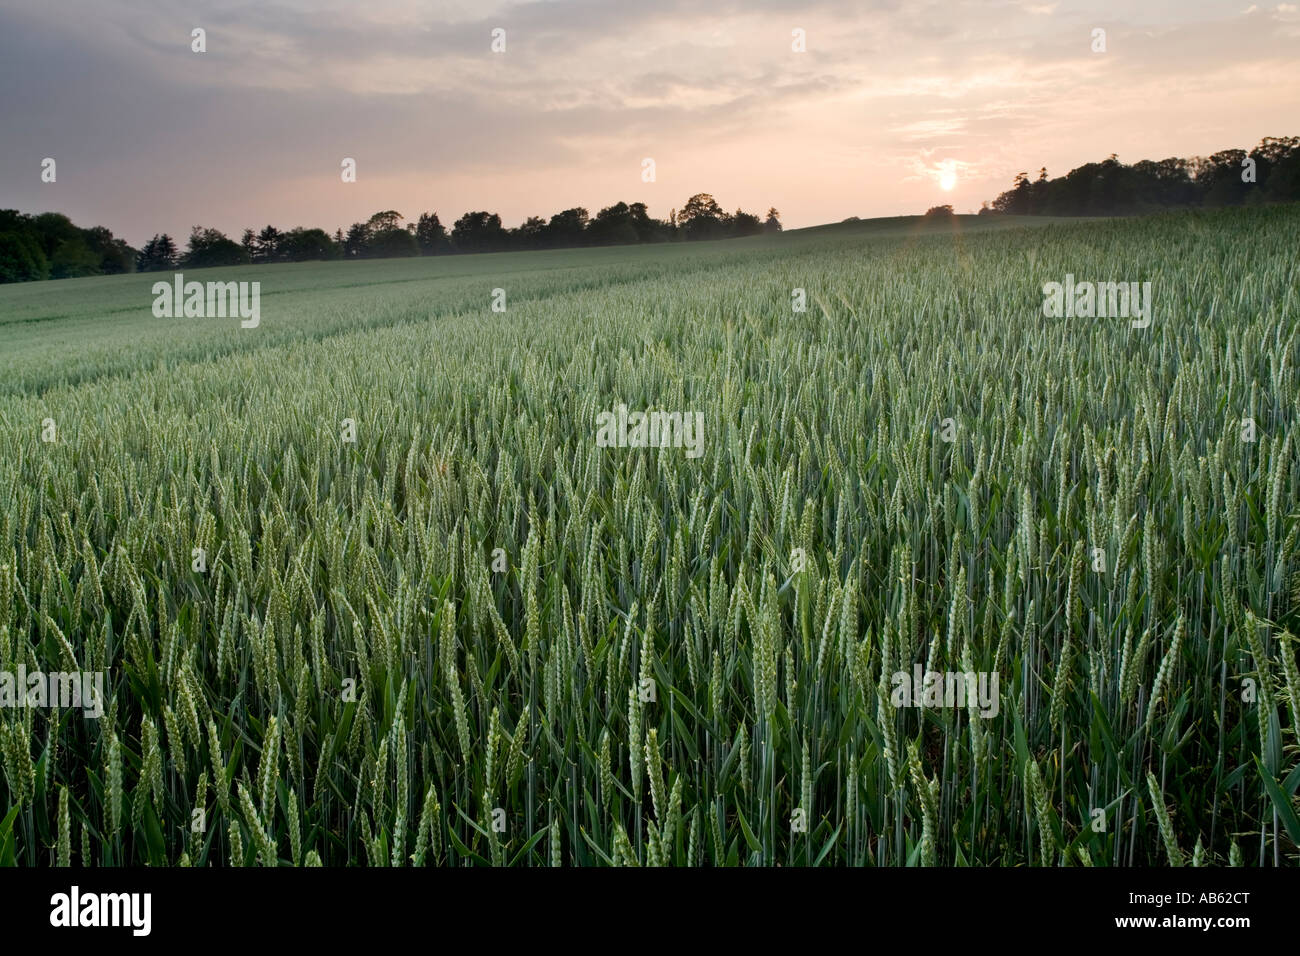 A field of barley on the Monteviot estate in the Scottish Borders near Ancrum, Scotland Stock Photo